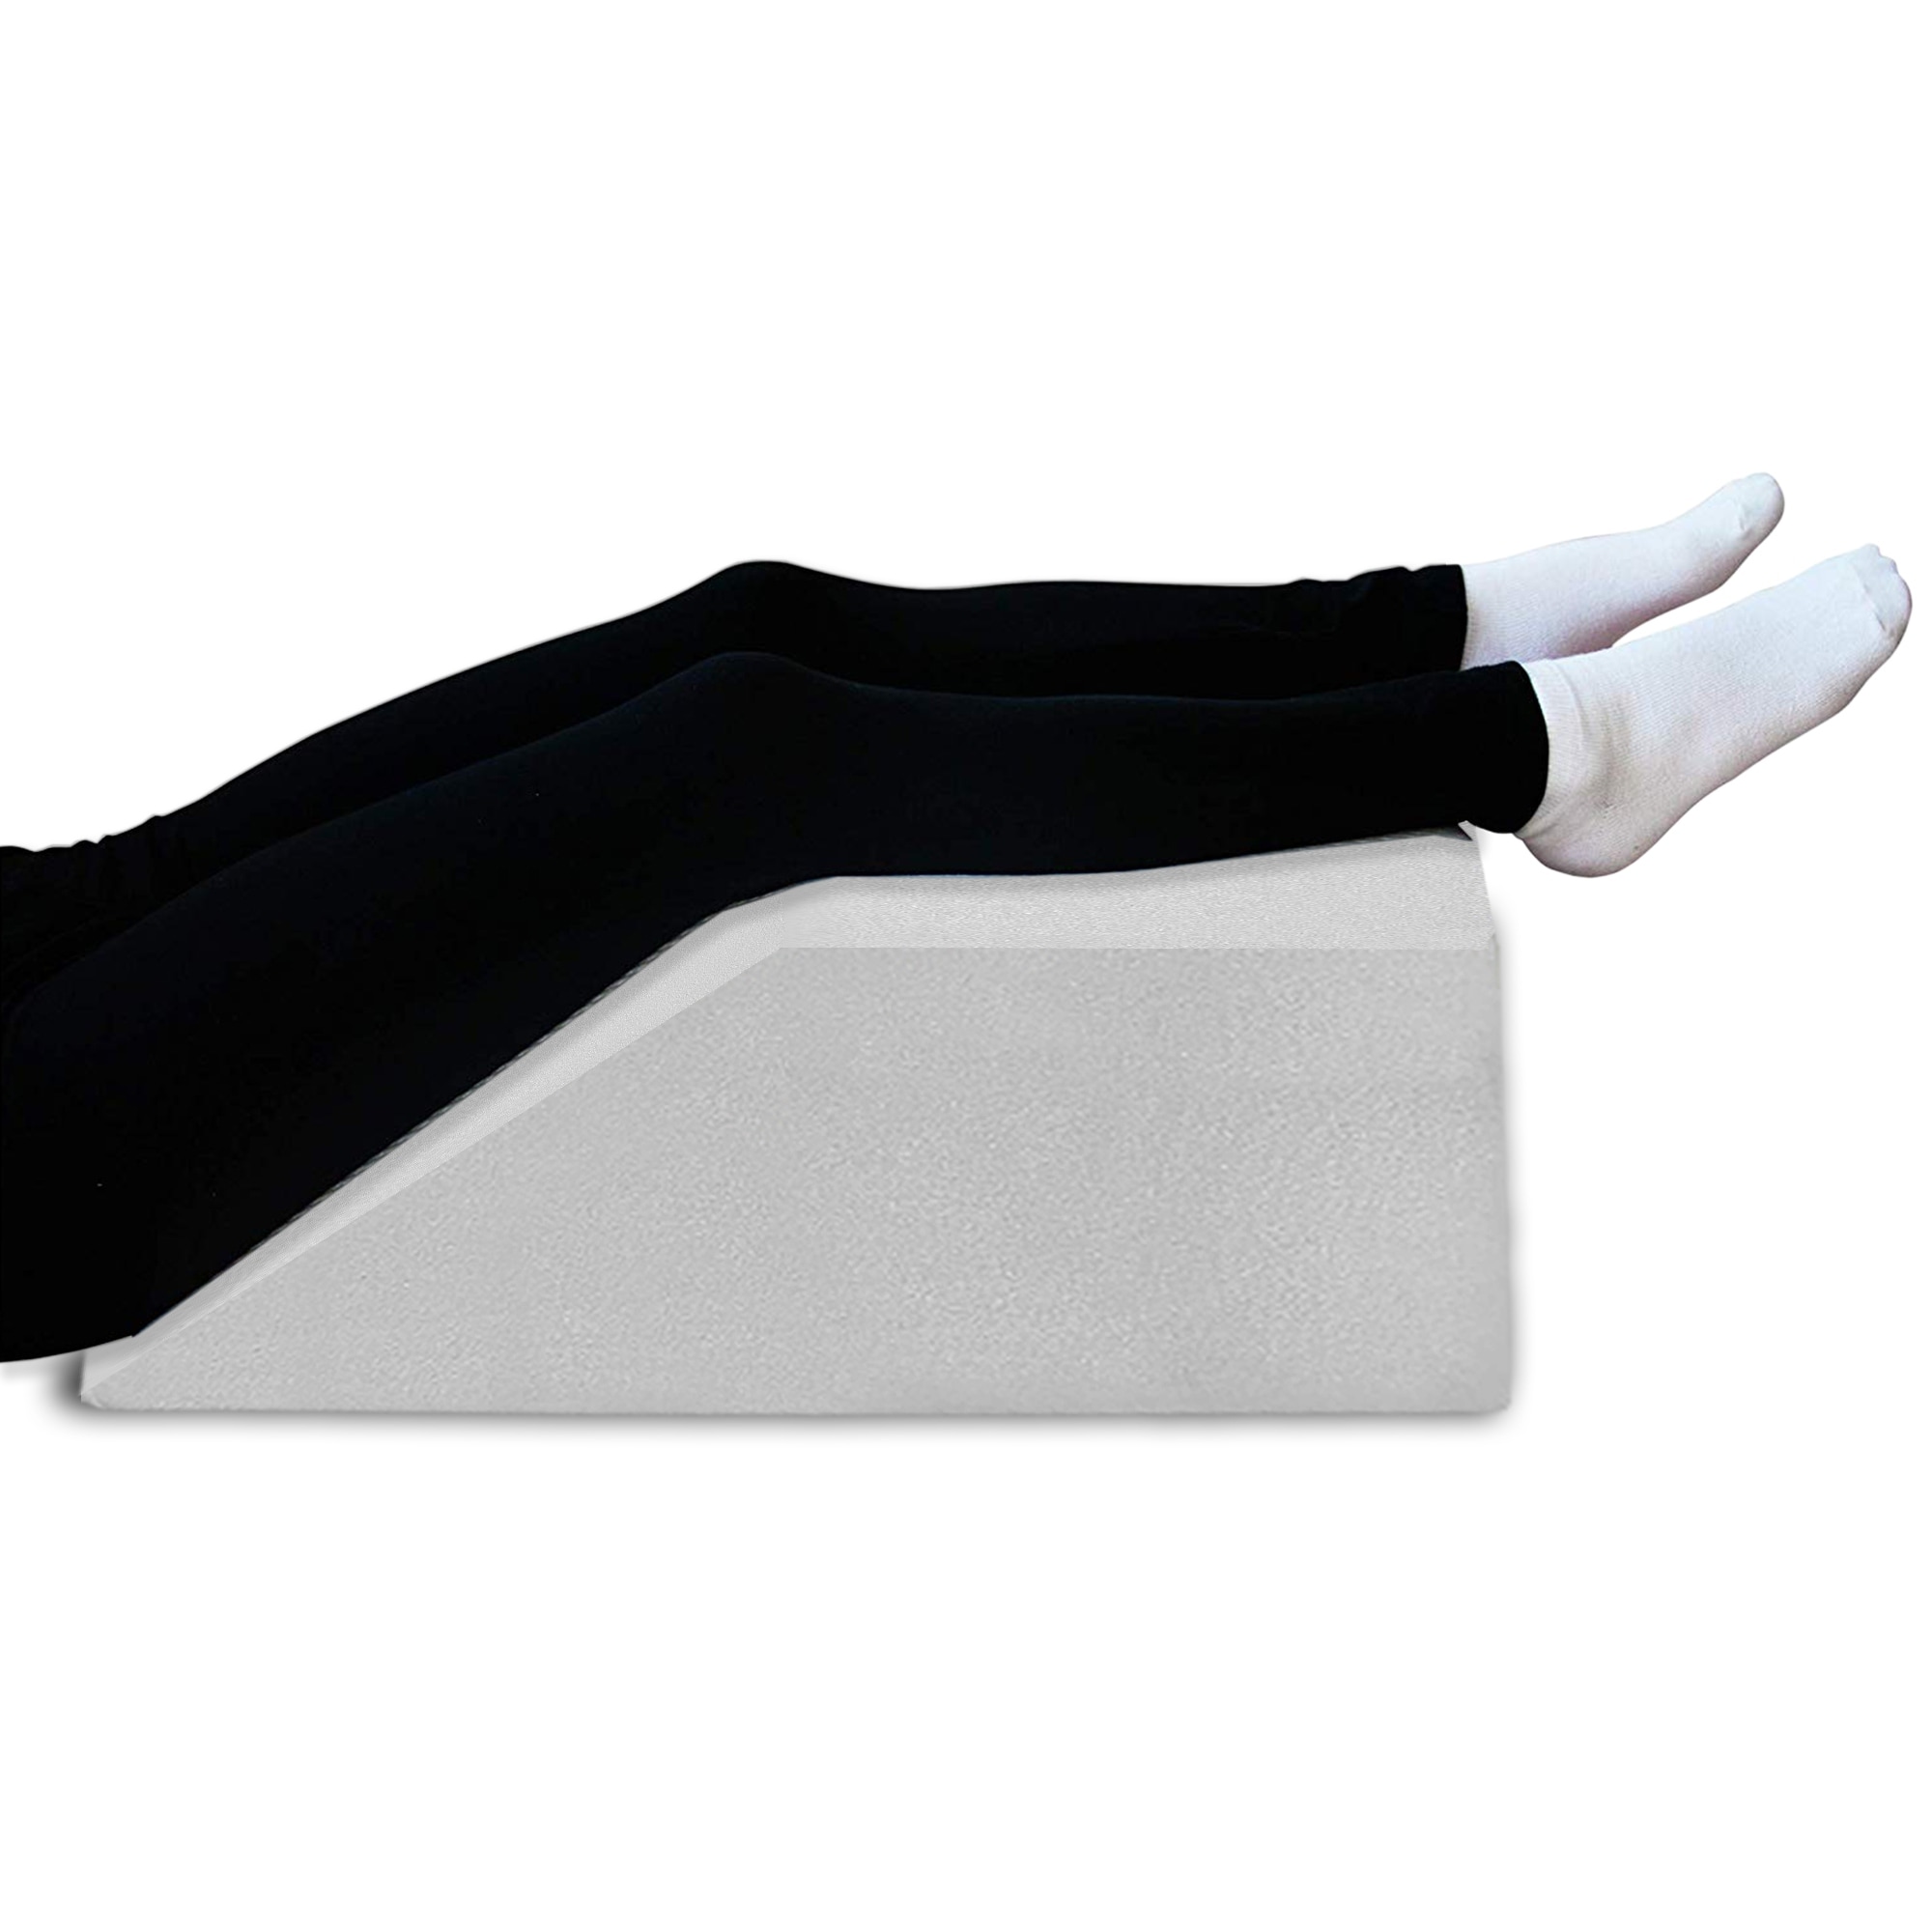 ProCare Elevating Foam Cushion Leg Rest Support Pillow: Inclined Wedge, One  Size Fits Most 